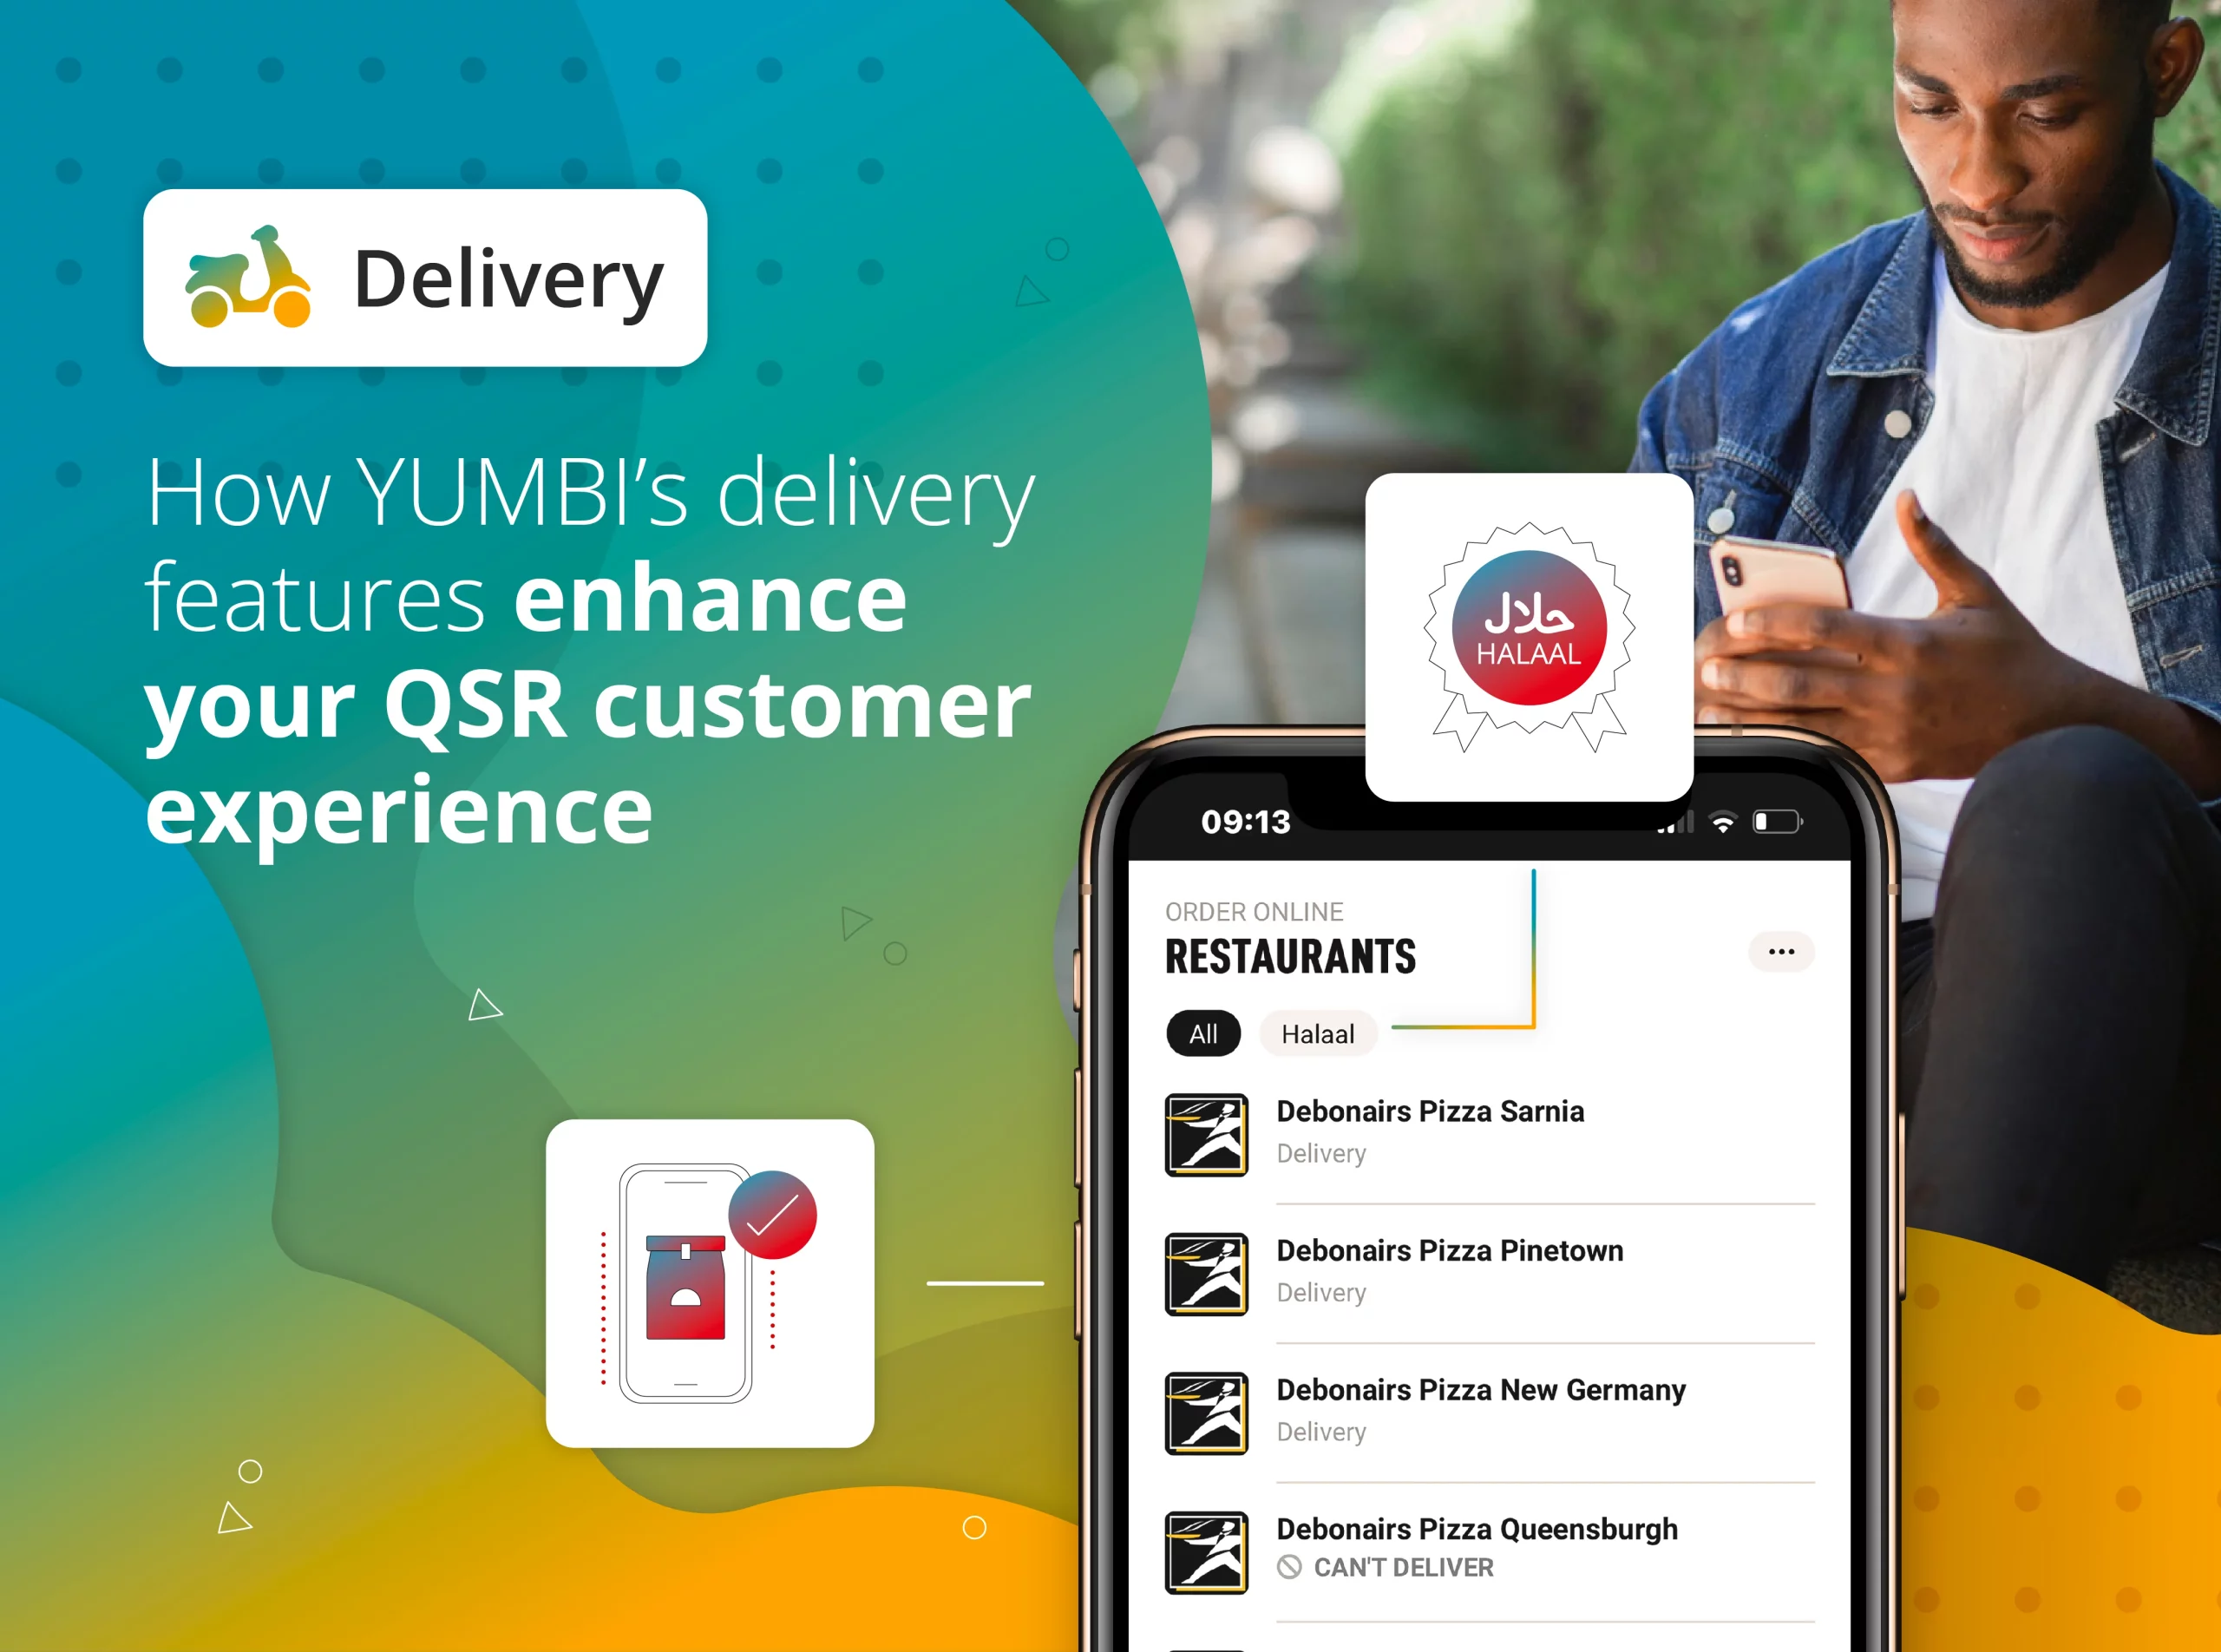 How YUMBI’s delivery features enhance your QSR customer experience